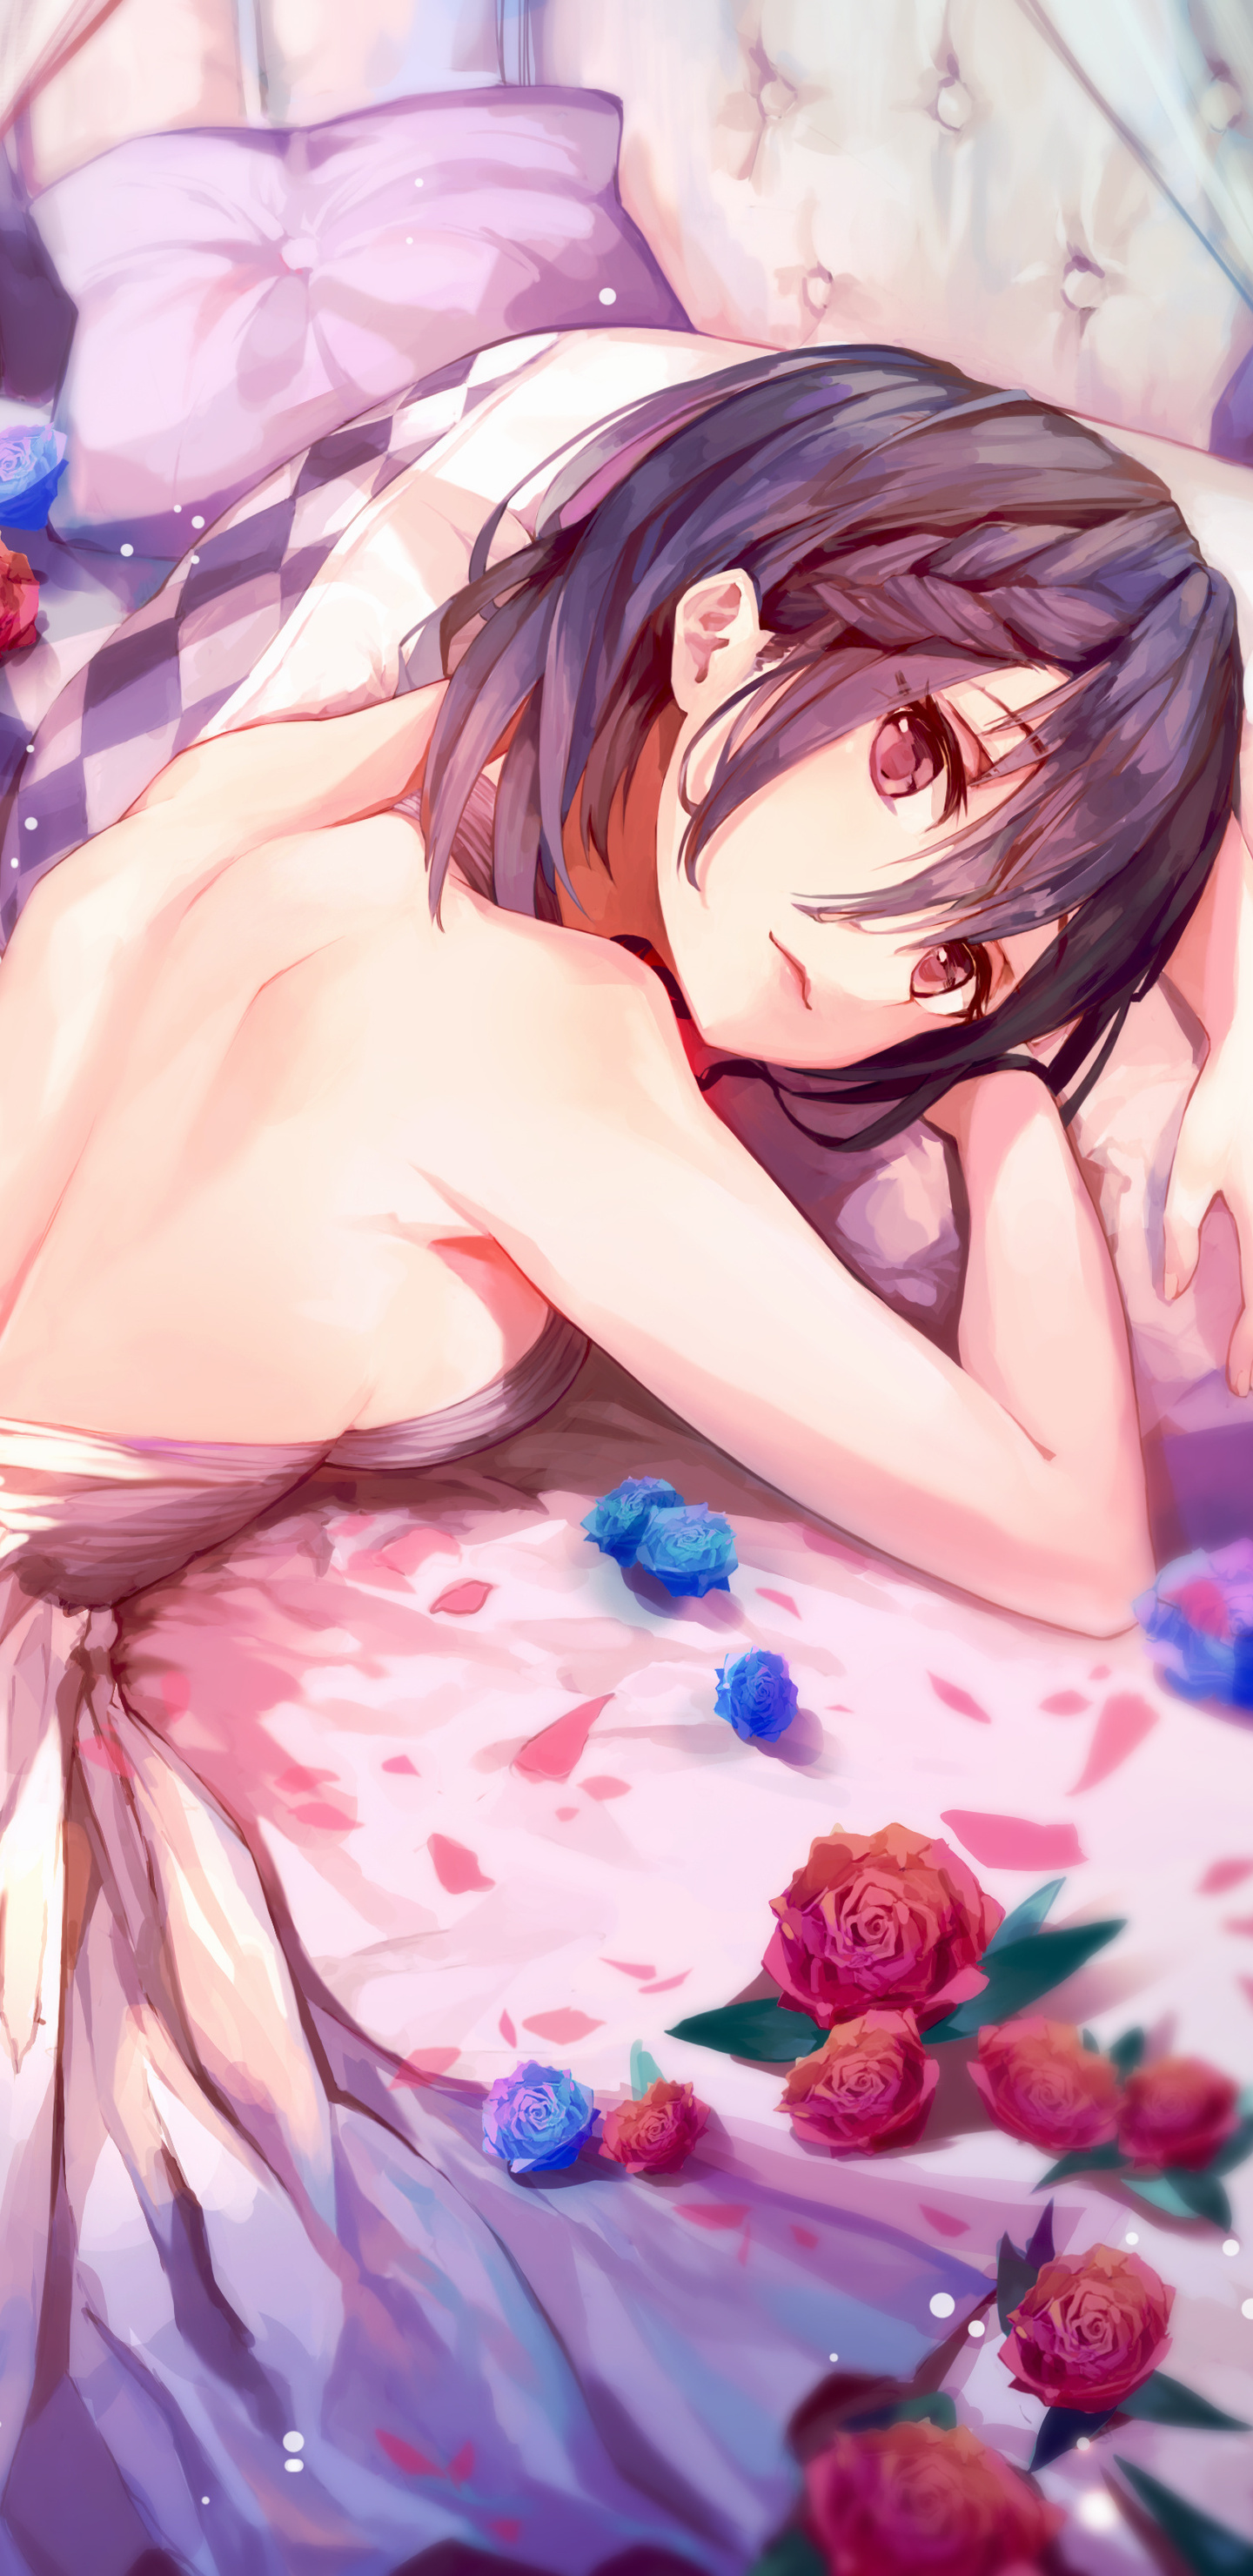 1440x2960 Anime Girl Bed Lying Down Samsung Galaxy Note 9,8, S9,S8,S8+ QHD  HD 4k Wallpapers, Images, Backgrounds, Photos and Pictures